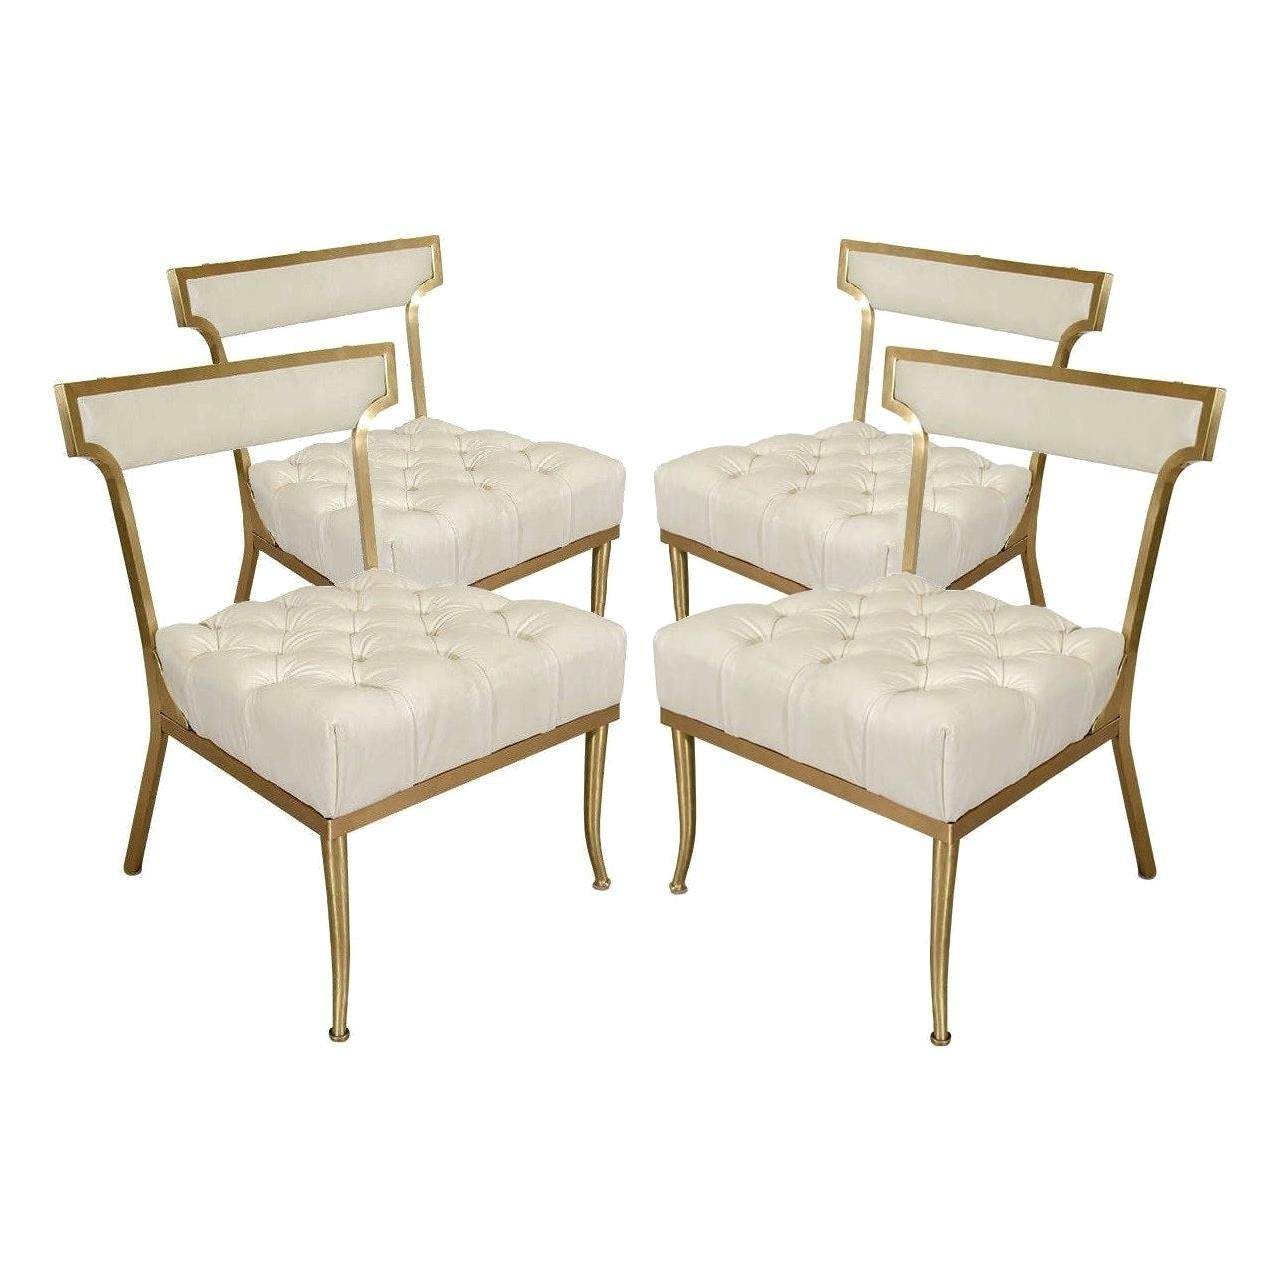 Four White and Brass Chairs by William "Billy" Haines